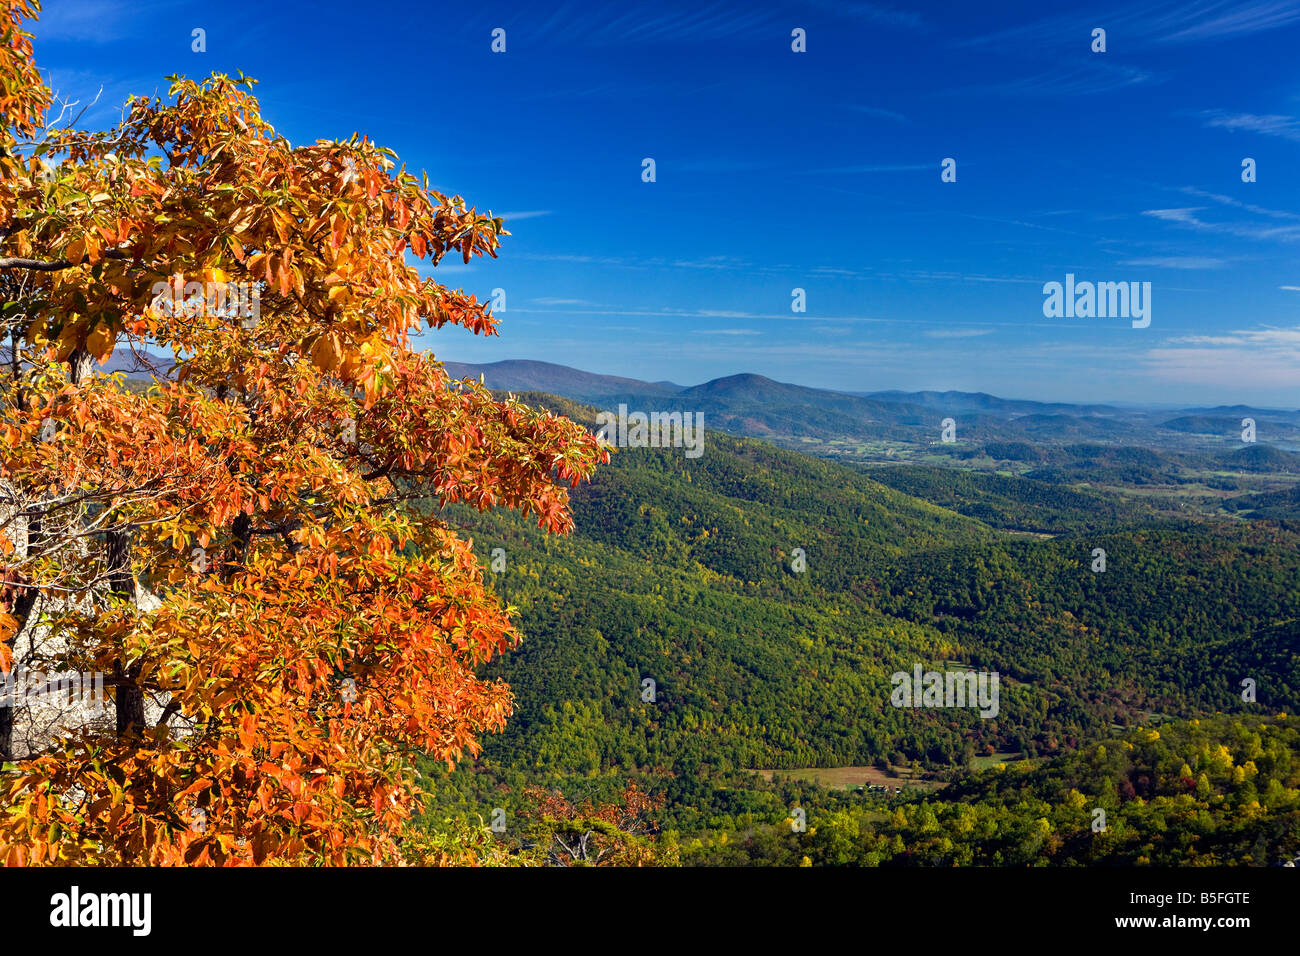 View of the Shenandoah Valley with fall colors against blue sky from Old Rag Mountain, Shenandoah National Park, Virginia. Stock Photo